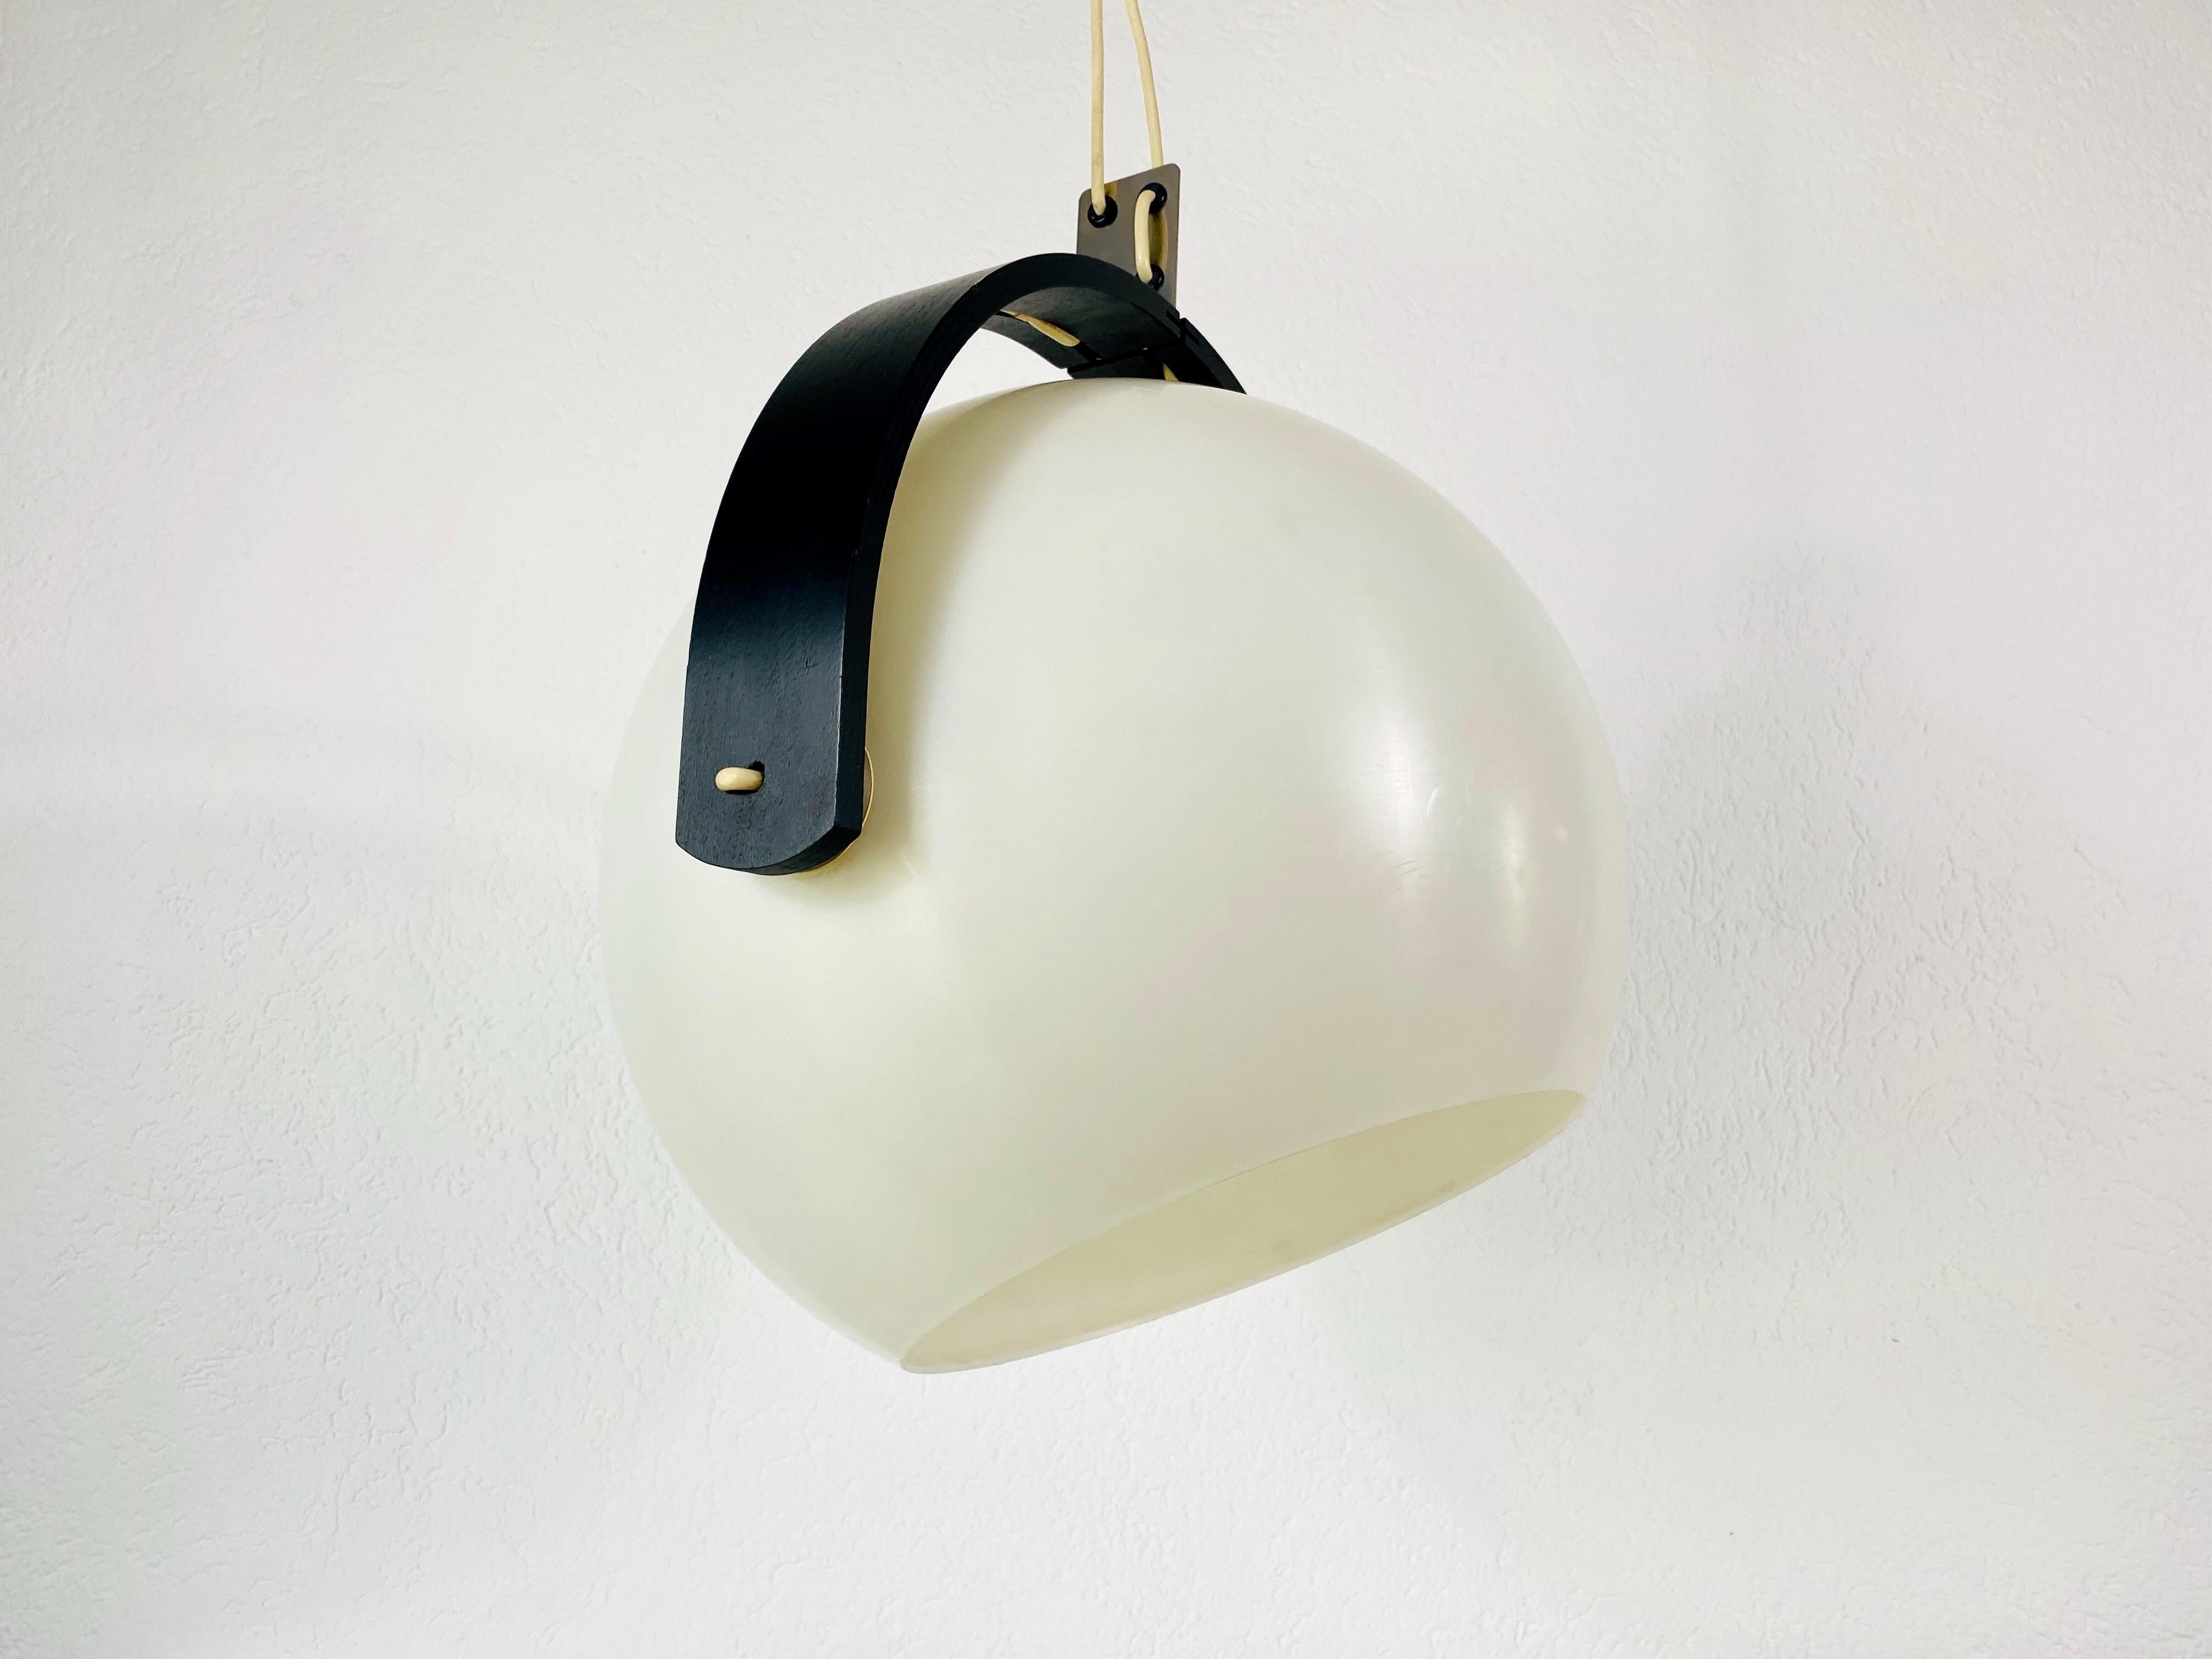 Black and white pendant lamp by Temde in the 1970s. It is made from wood and plastic.

Measures: Height 42-120 cm
Diameter 42 cm

The light requires one E27 light bulb. Very good vintage condition.

Free worldwide shipping.
 